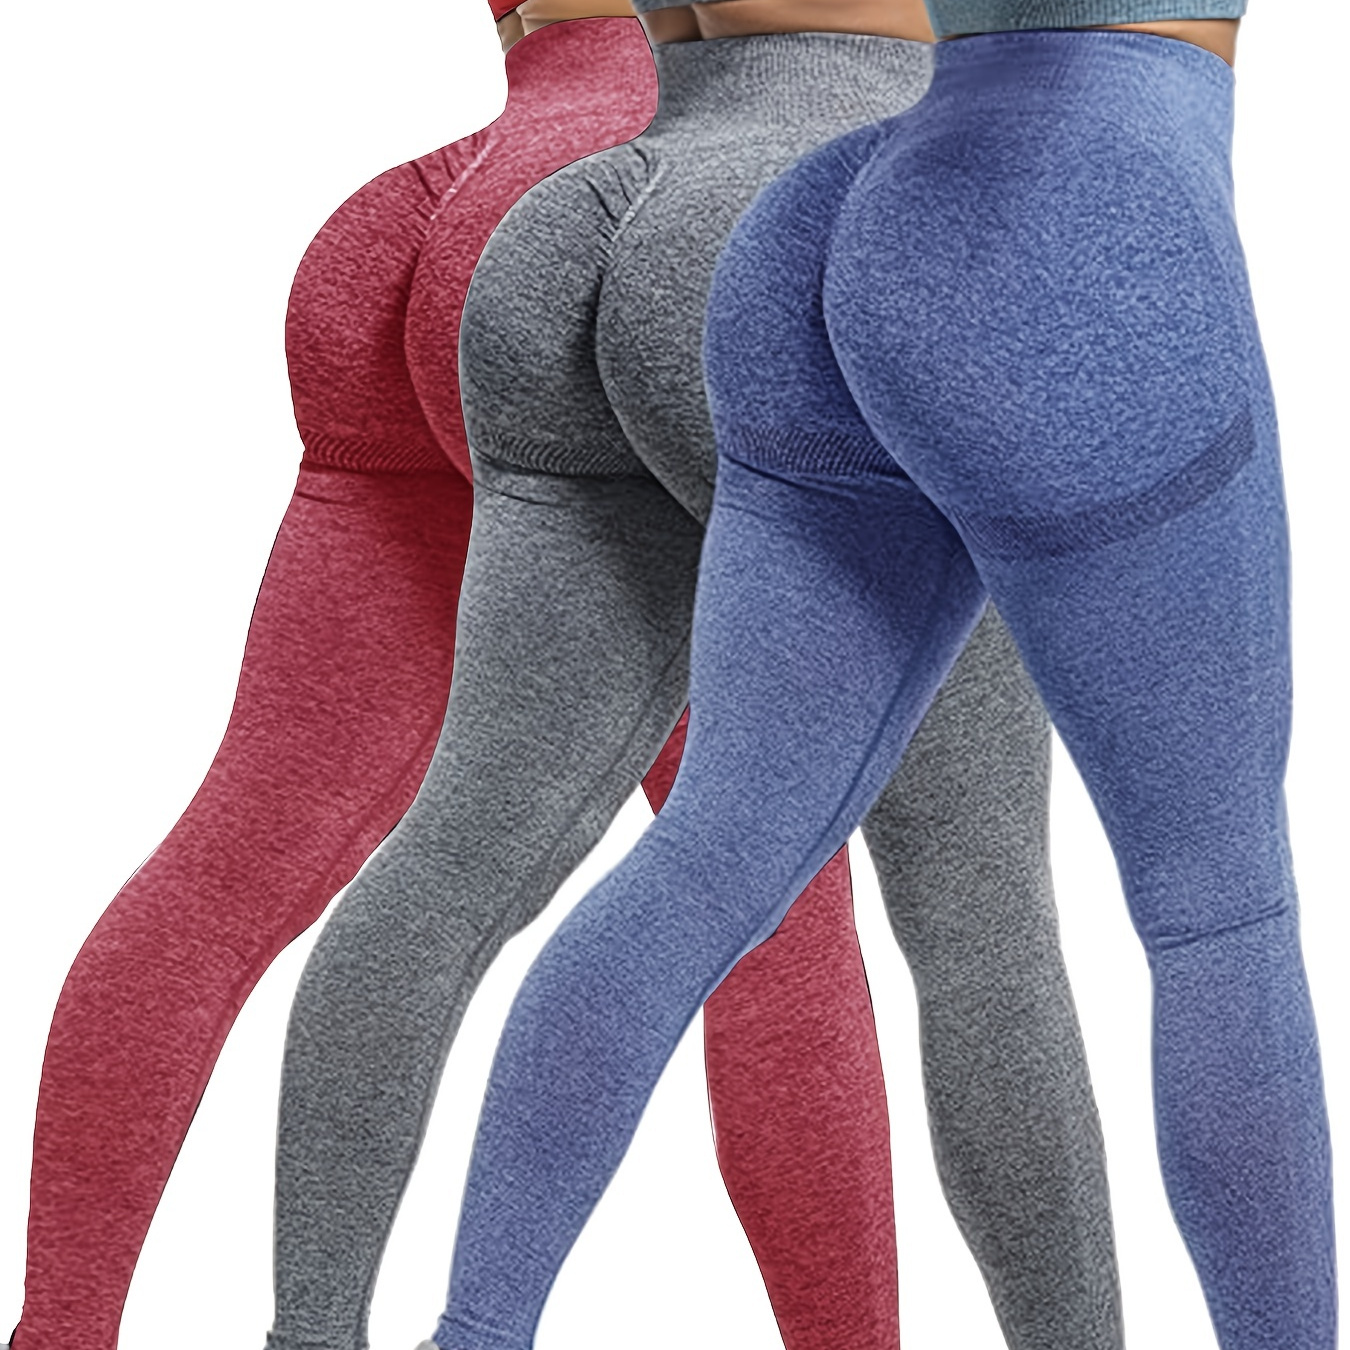 

3pcs Seamless Solid Color High Waist Fitness Pants, High Elastic Butt Lifting Sports Tight Yoga Leggings, Women's Activewear